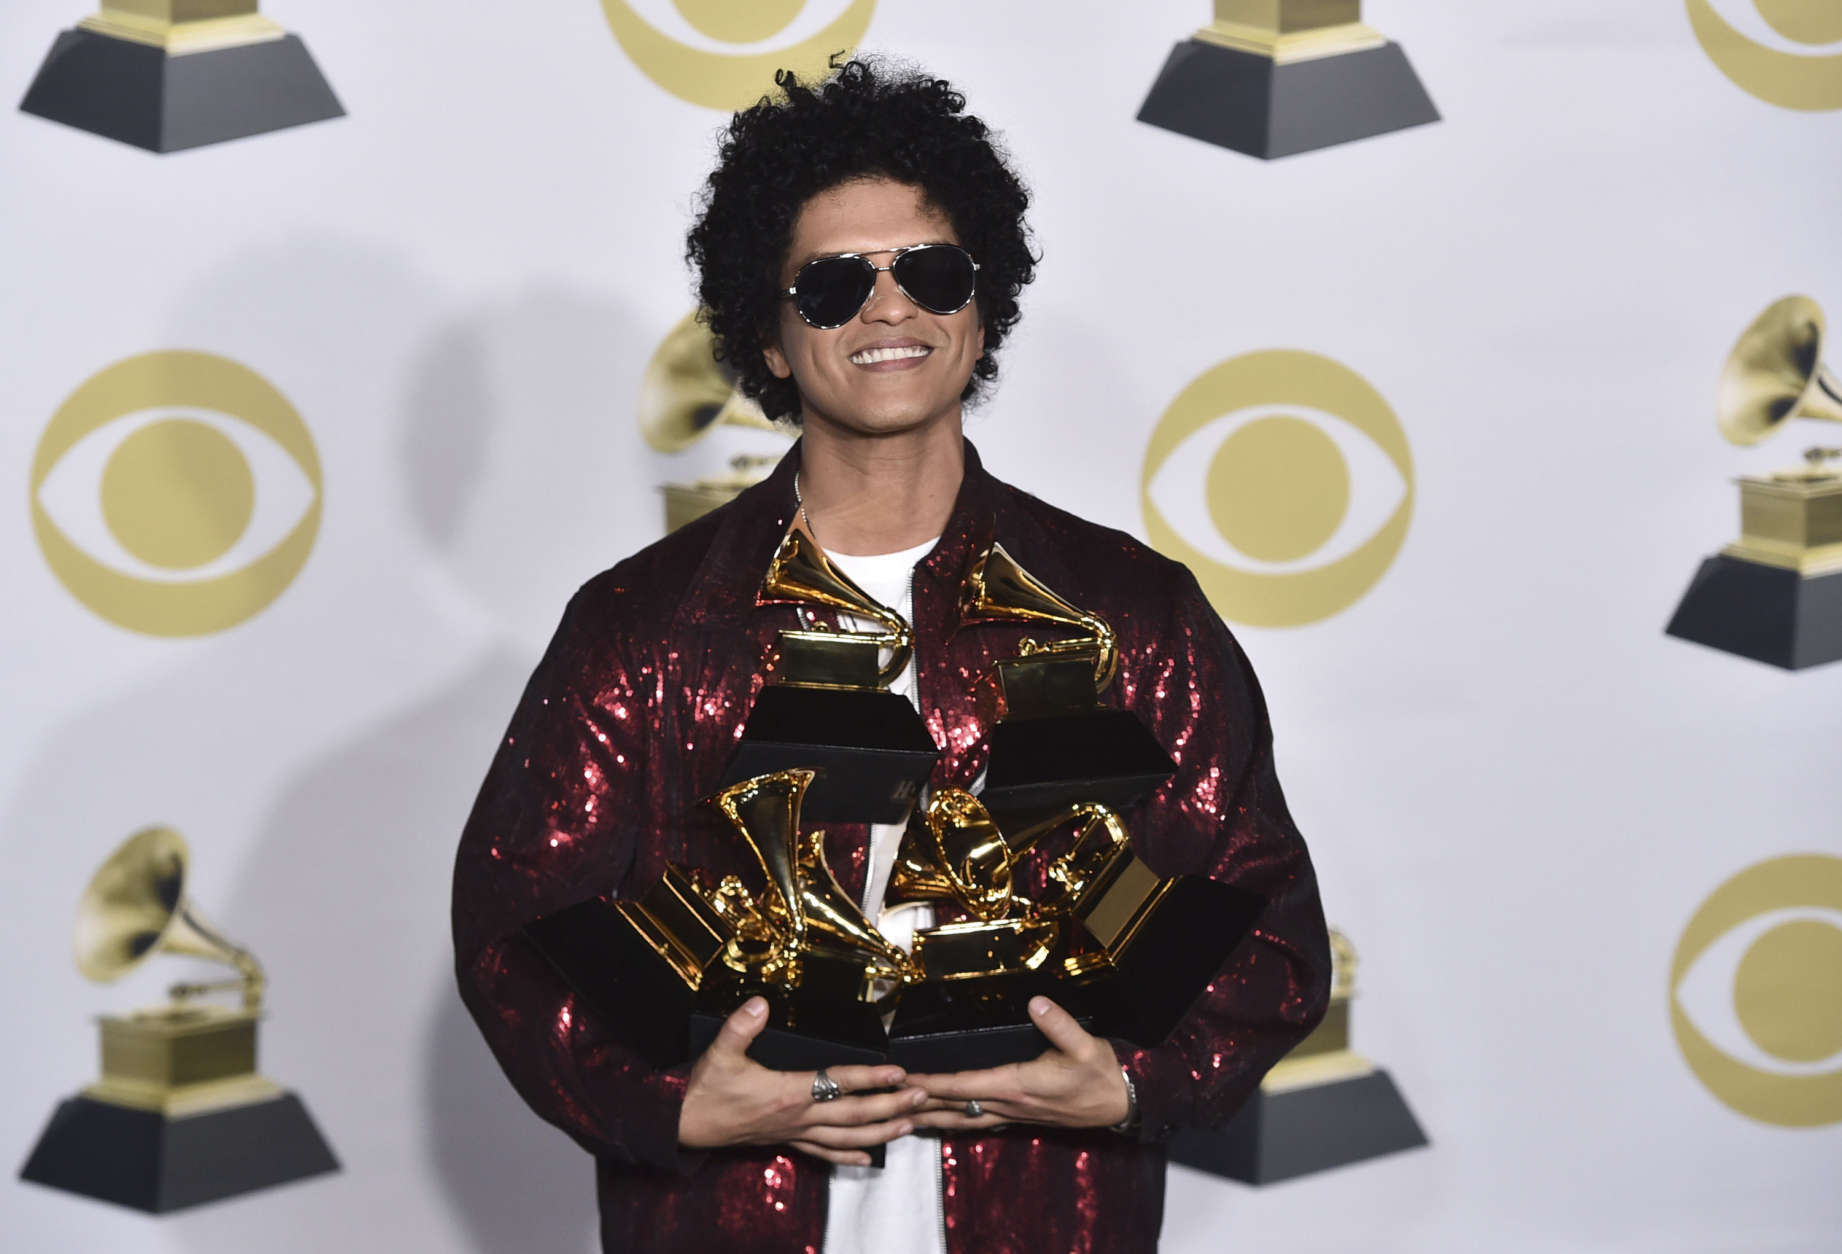 Bruno Mars poses in the press room with his awards for best R&amp;B album, record of the year, album of the year, best engineered album, non-classical, for "24K Magic," and song of the year, best R&amp;B performance and best R&amp;B song, for "That's What I Like" at the 60th annual Grammy Awards at Madison Square Garden on Sunday, Jan. 28, 2018, in New York. (Photo by Charles Sykes/Invision/AP)